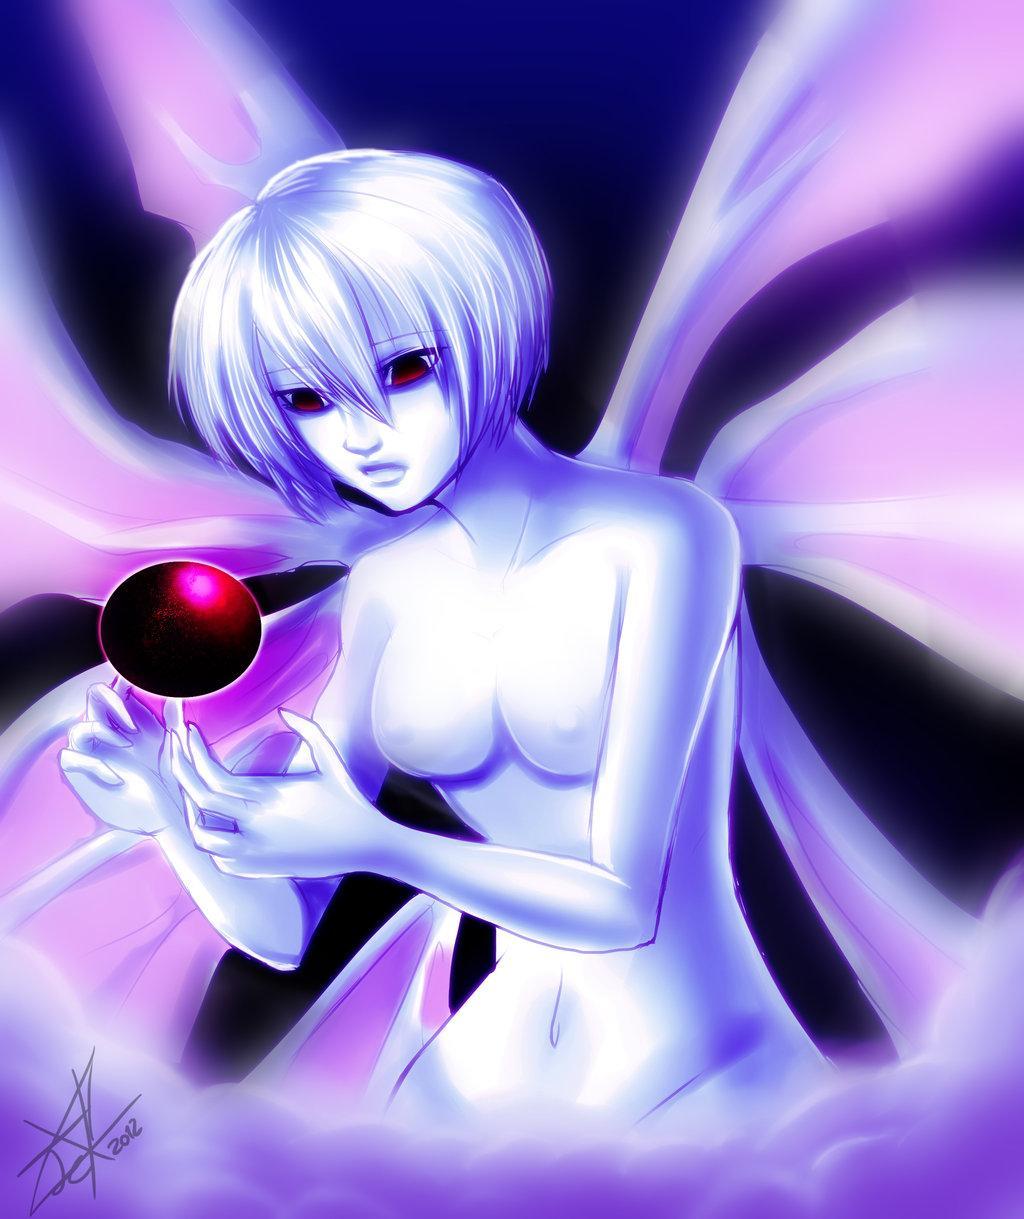 Nge  Rei lilith By rainmoonsapphire55 d5ixs3f